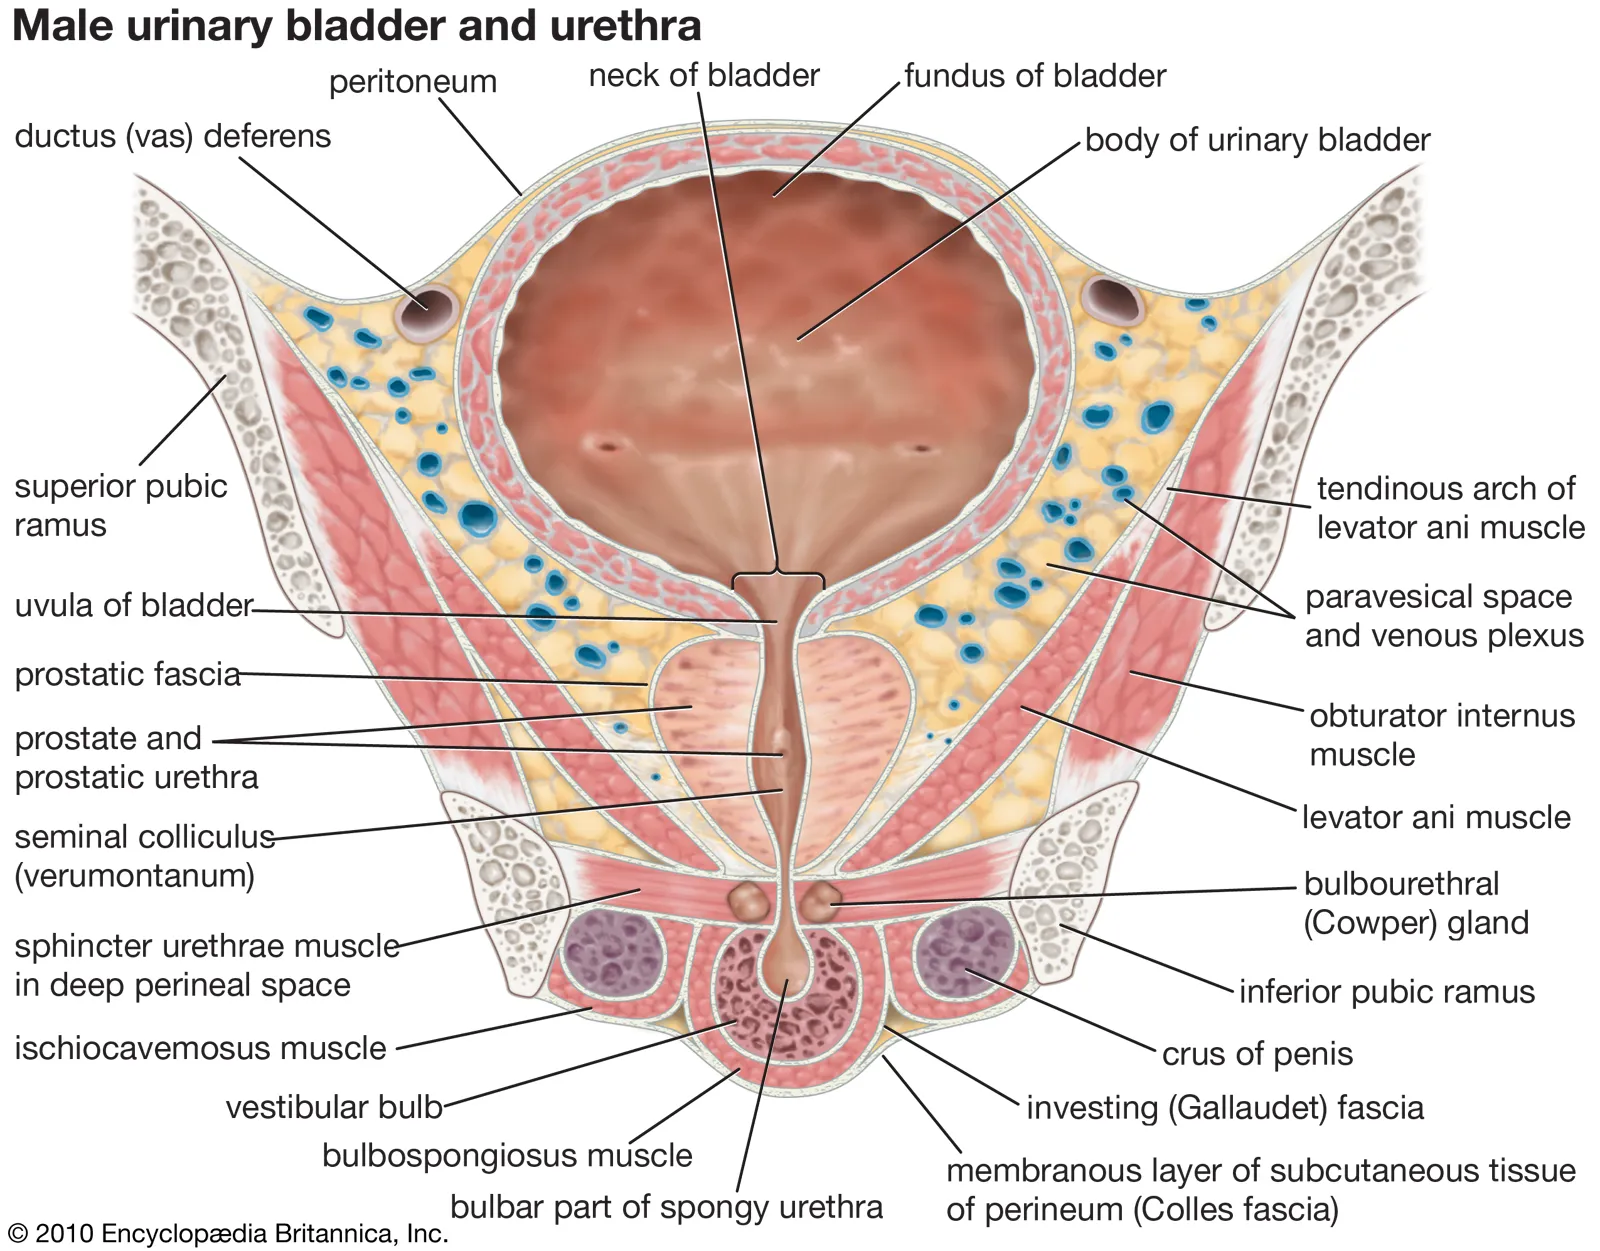 <p>✶The bladder can hold up to 400ml without much increase in pressure.</p><p>✶It takes on a spherical structure as it fills with urine.</p>